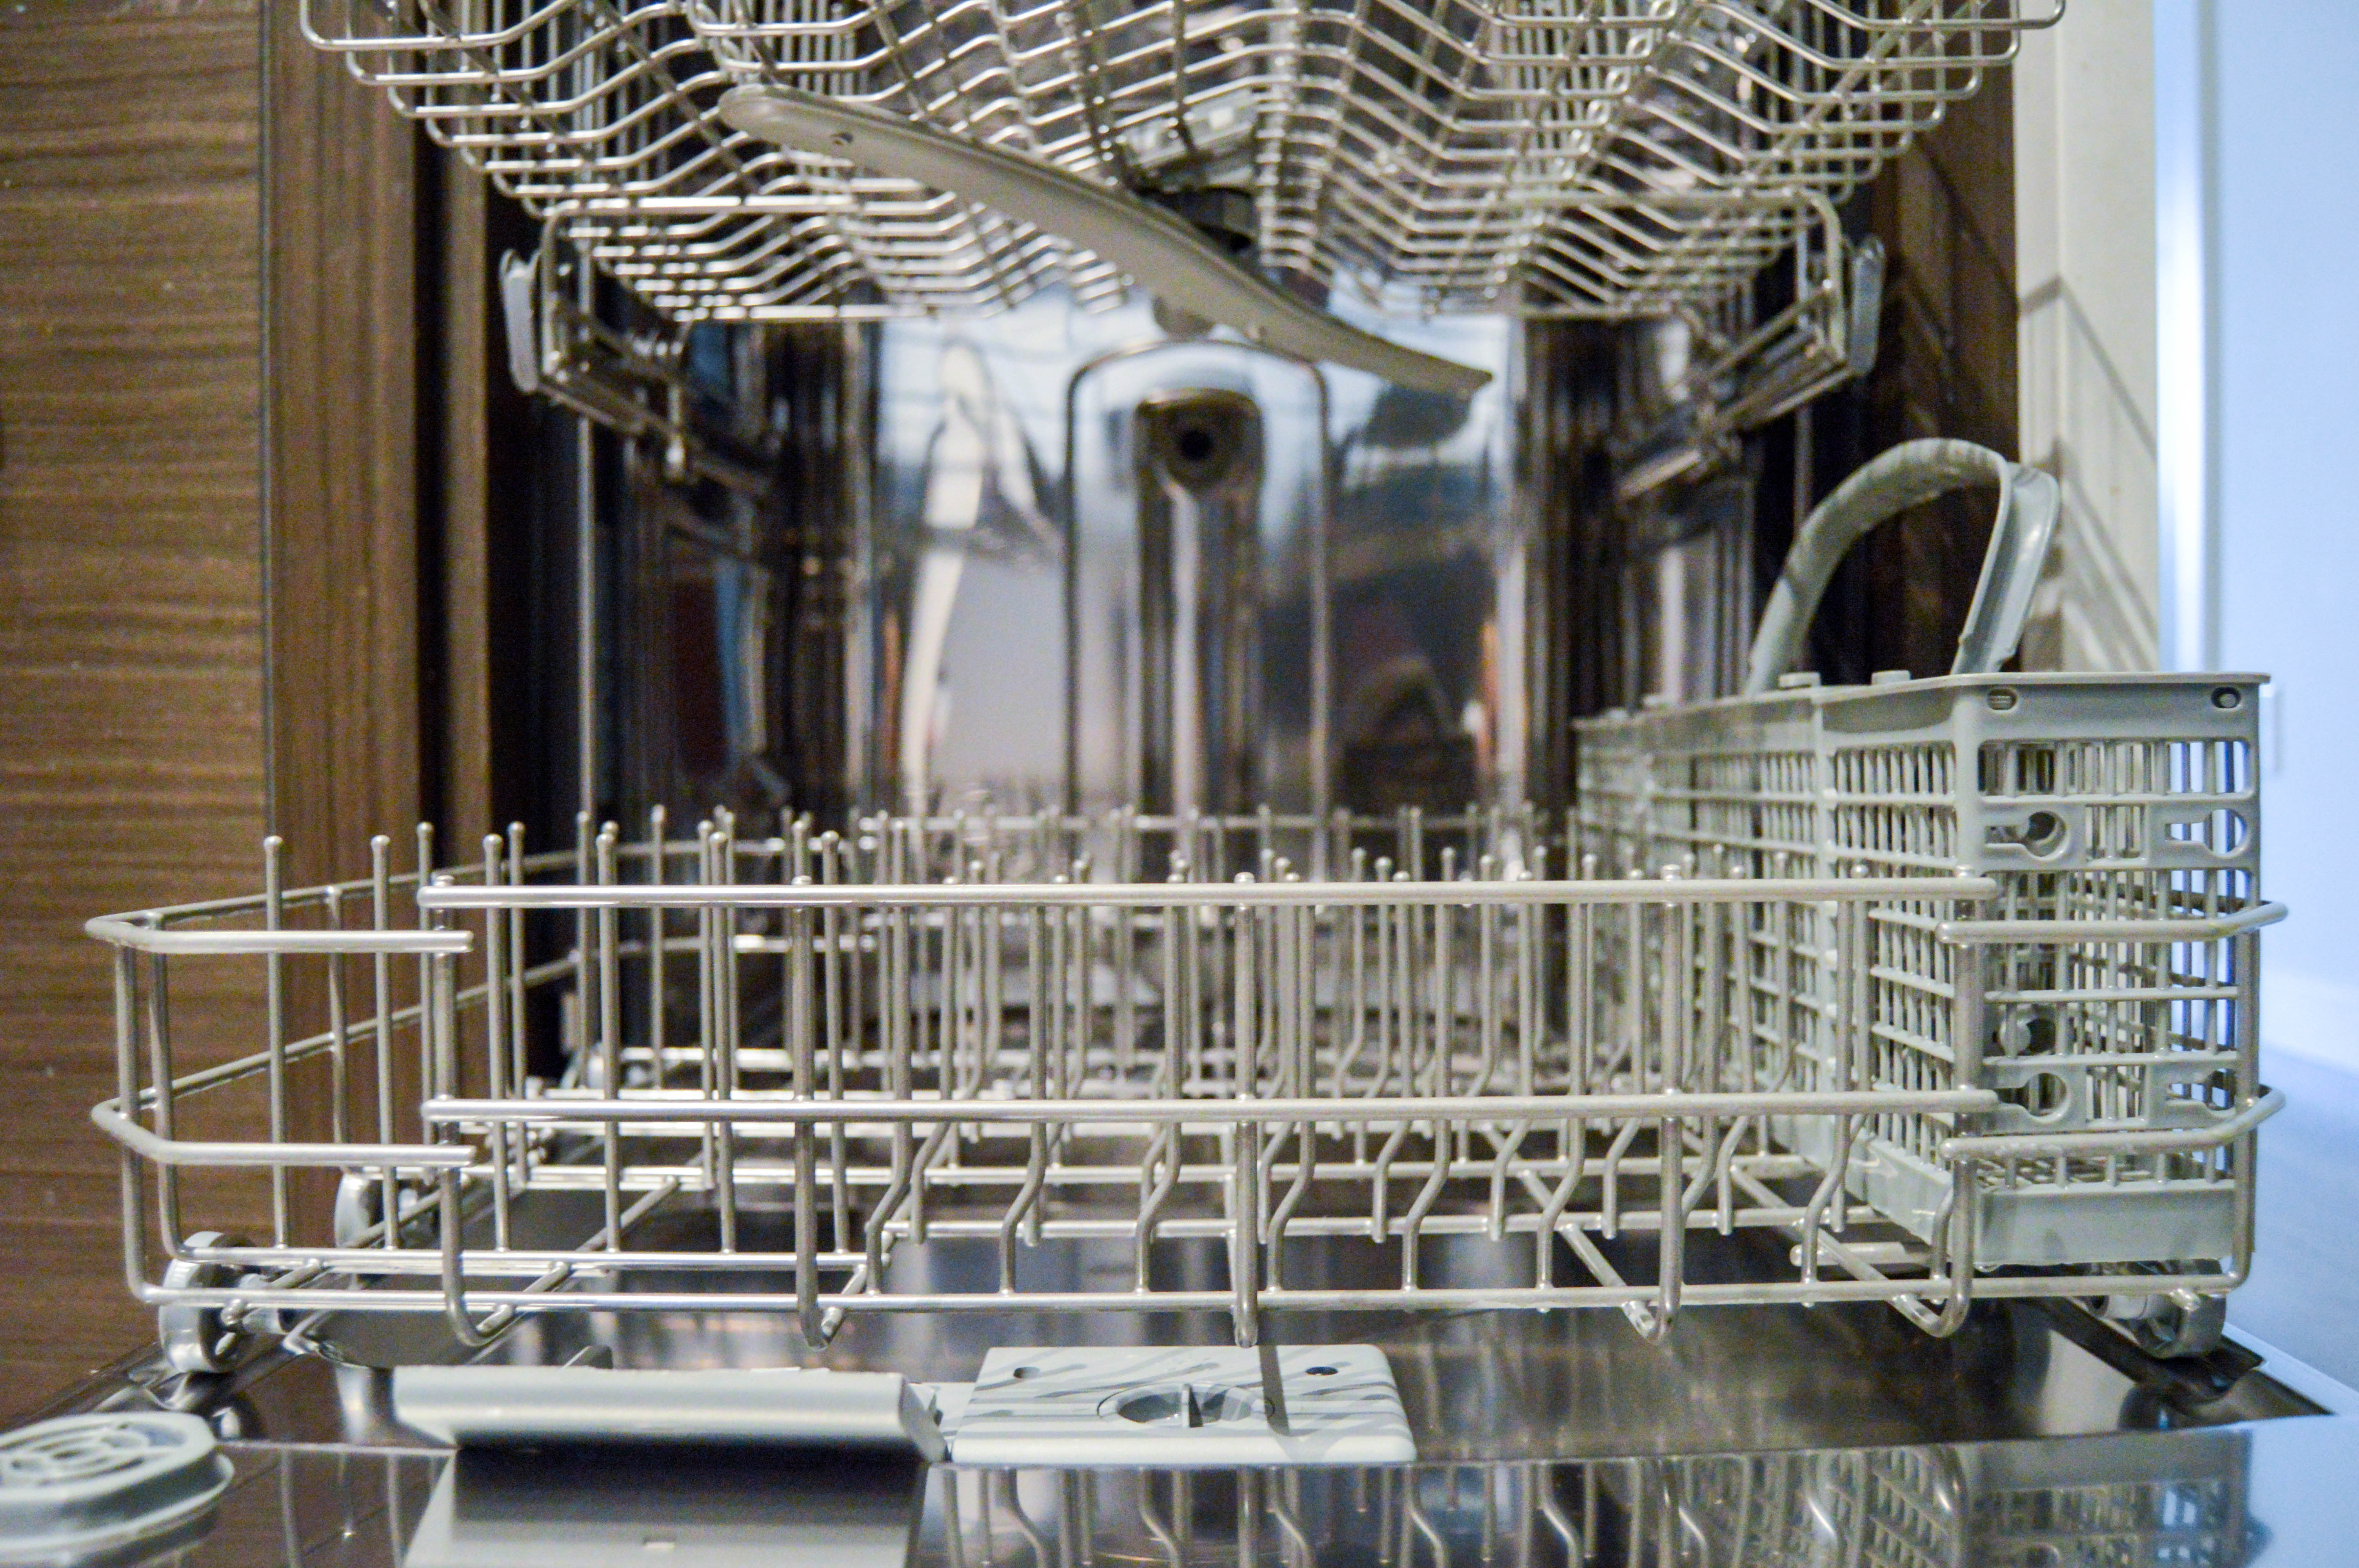 Seven surprising things you can wash in the dishwasher. Kitchen dishwasher hack for cleaning normal objects around the home like kids toys, toothbrushes, and tools. Cool kitchen hacks and tips.